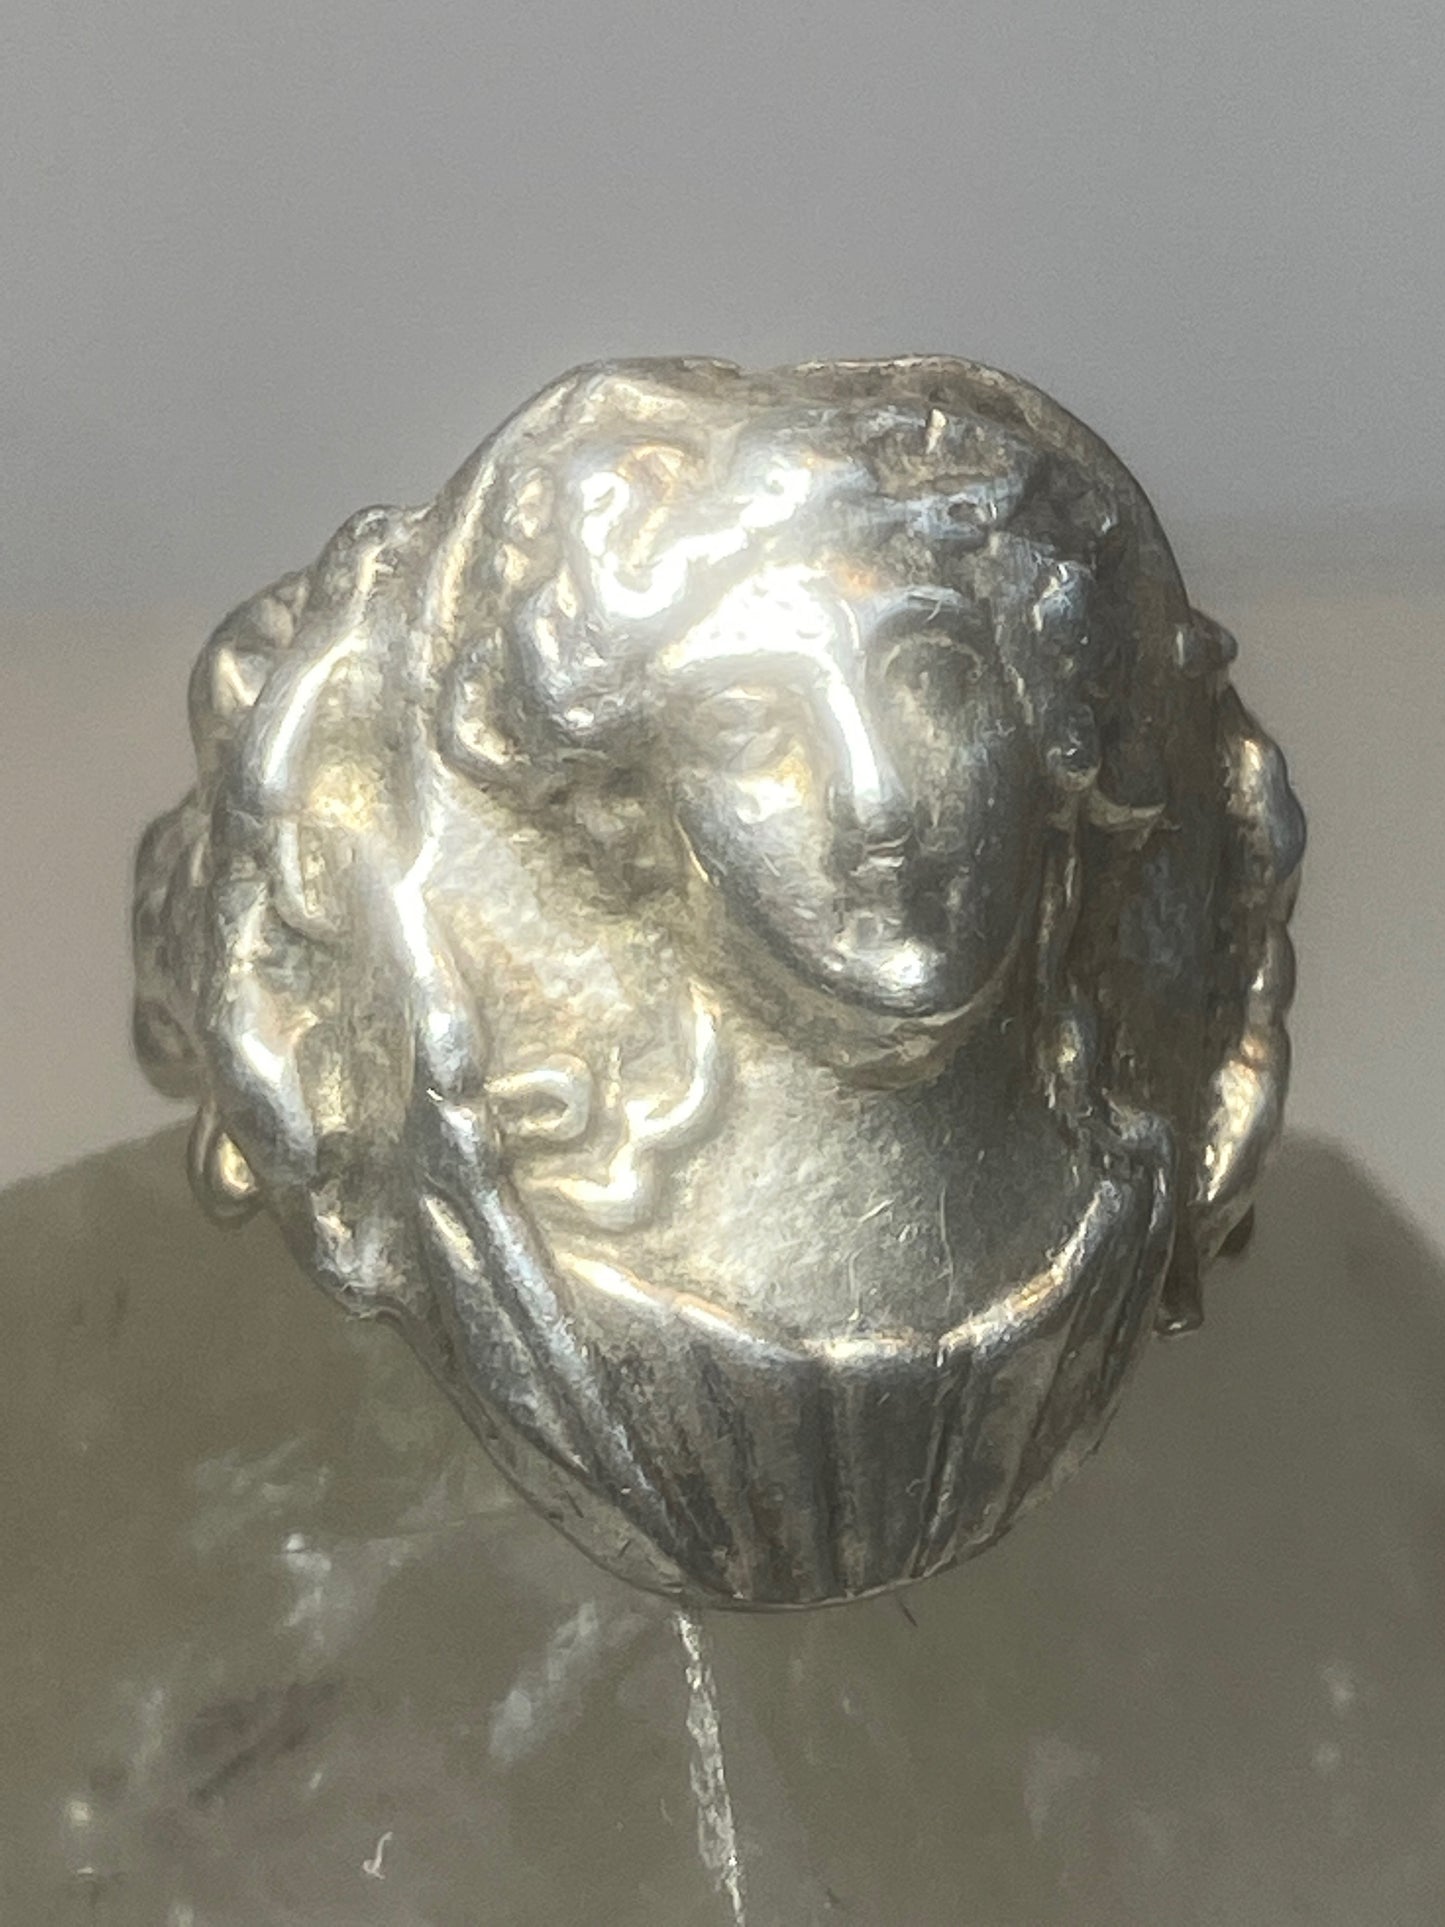 Victorian lady ring face band sterling silver women girls